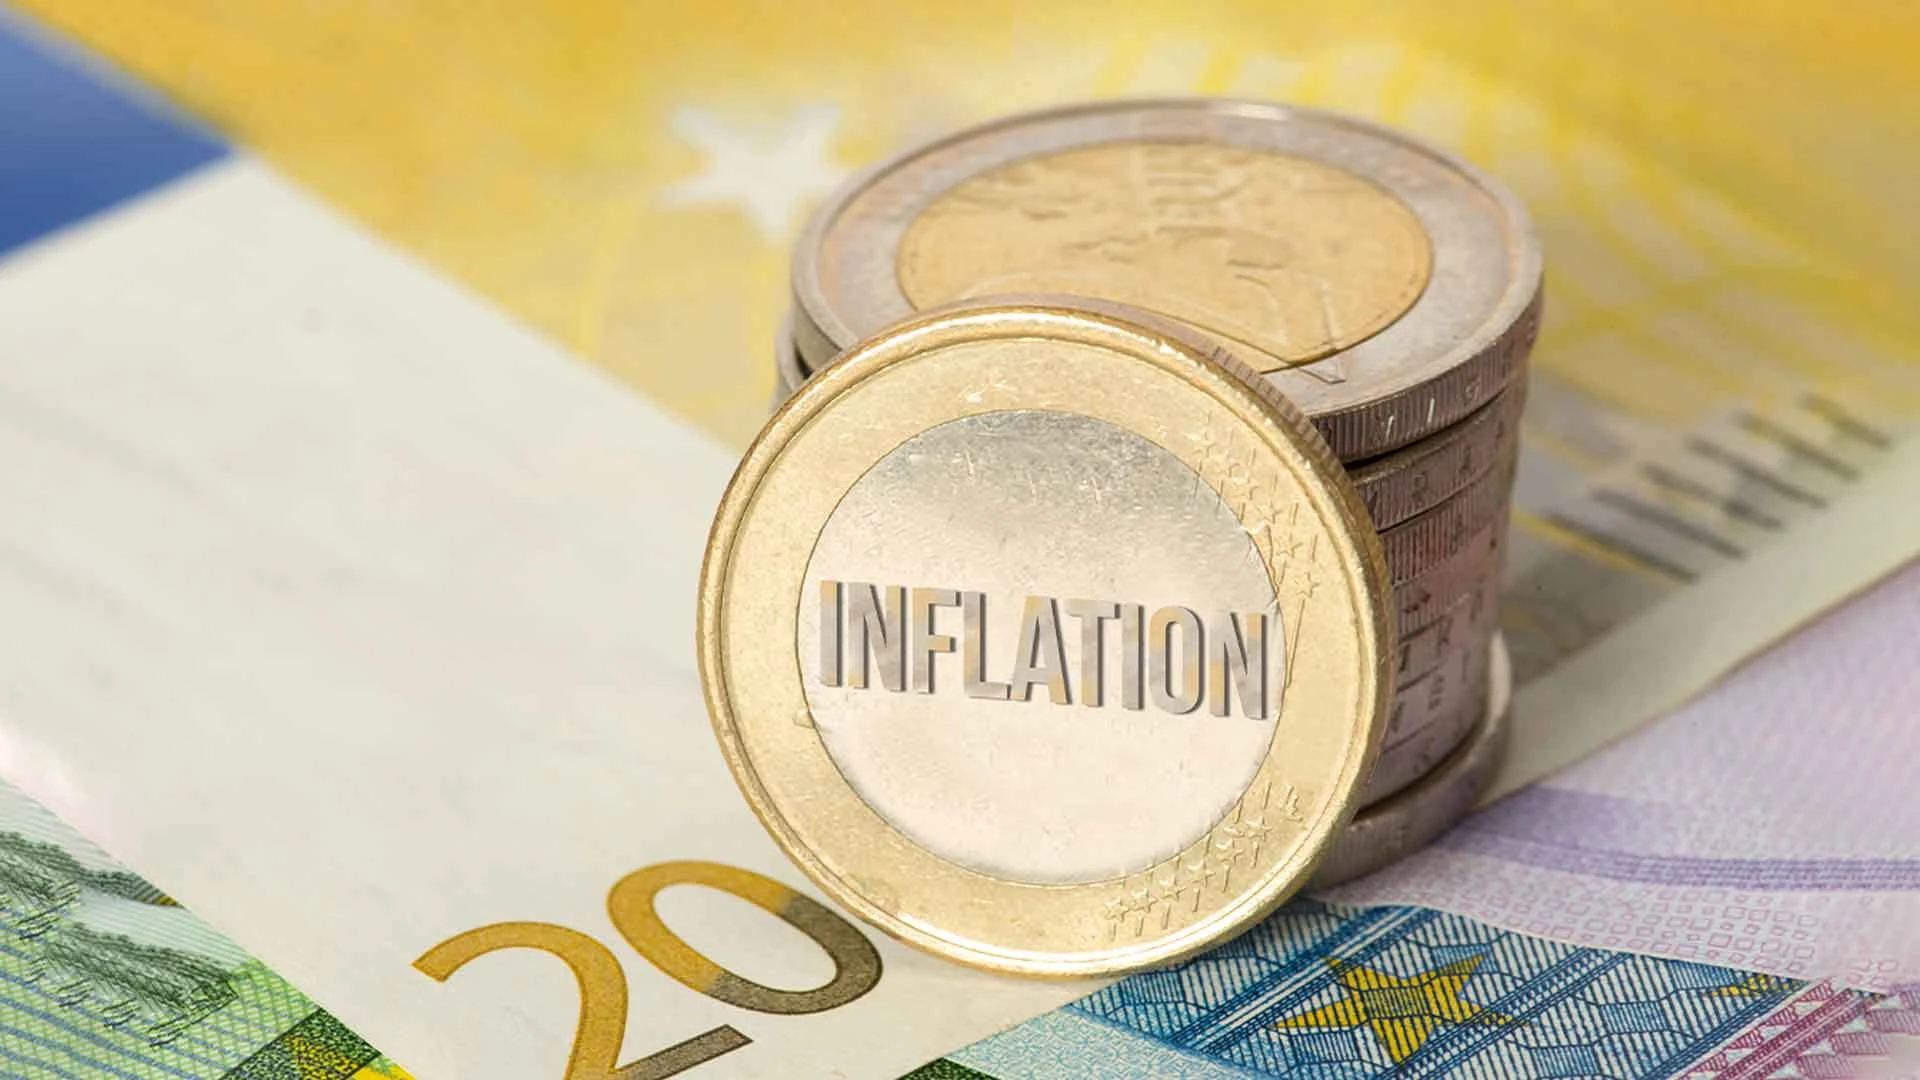 Europa Inflation Index